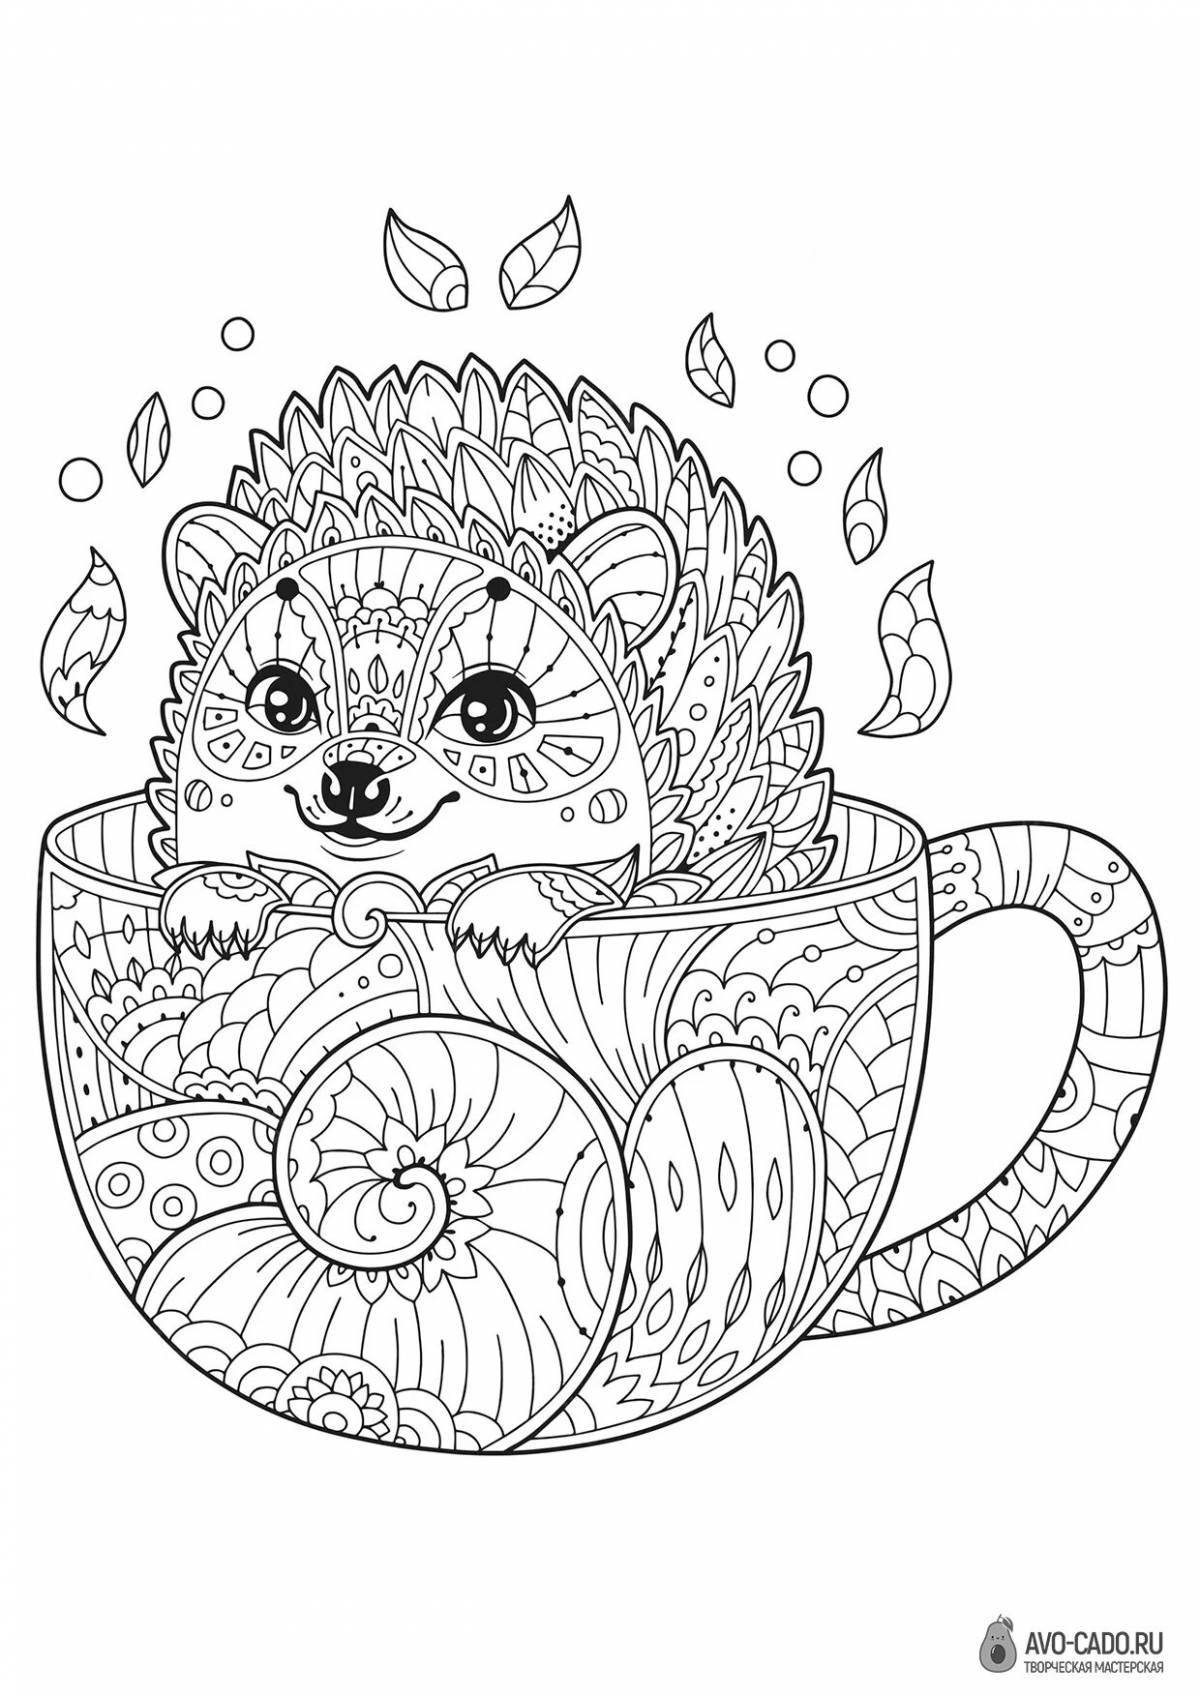 Animated anti-stress hedgehog coloring book